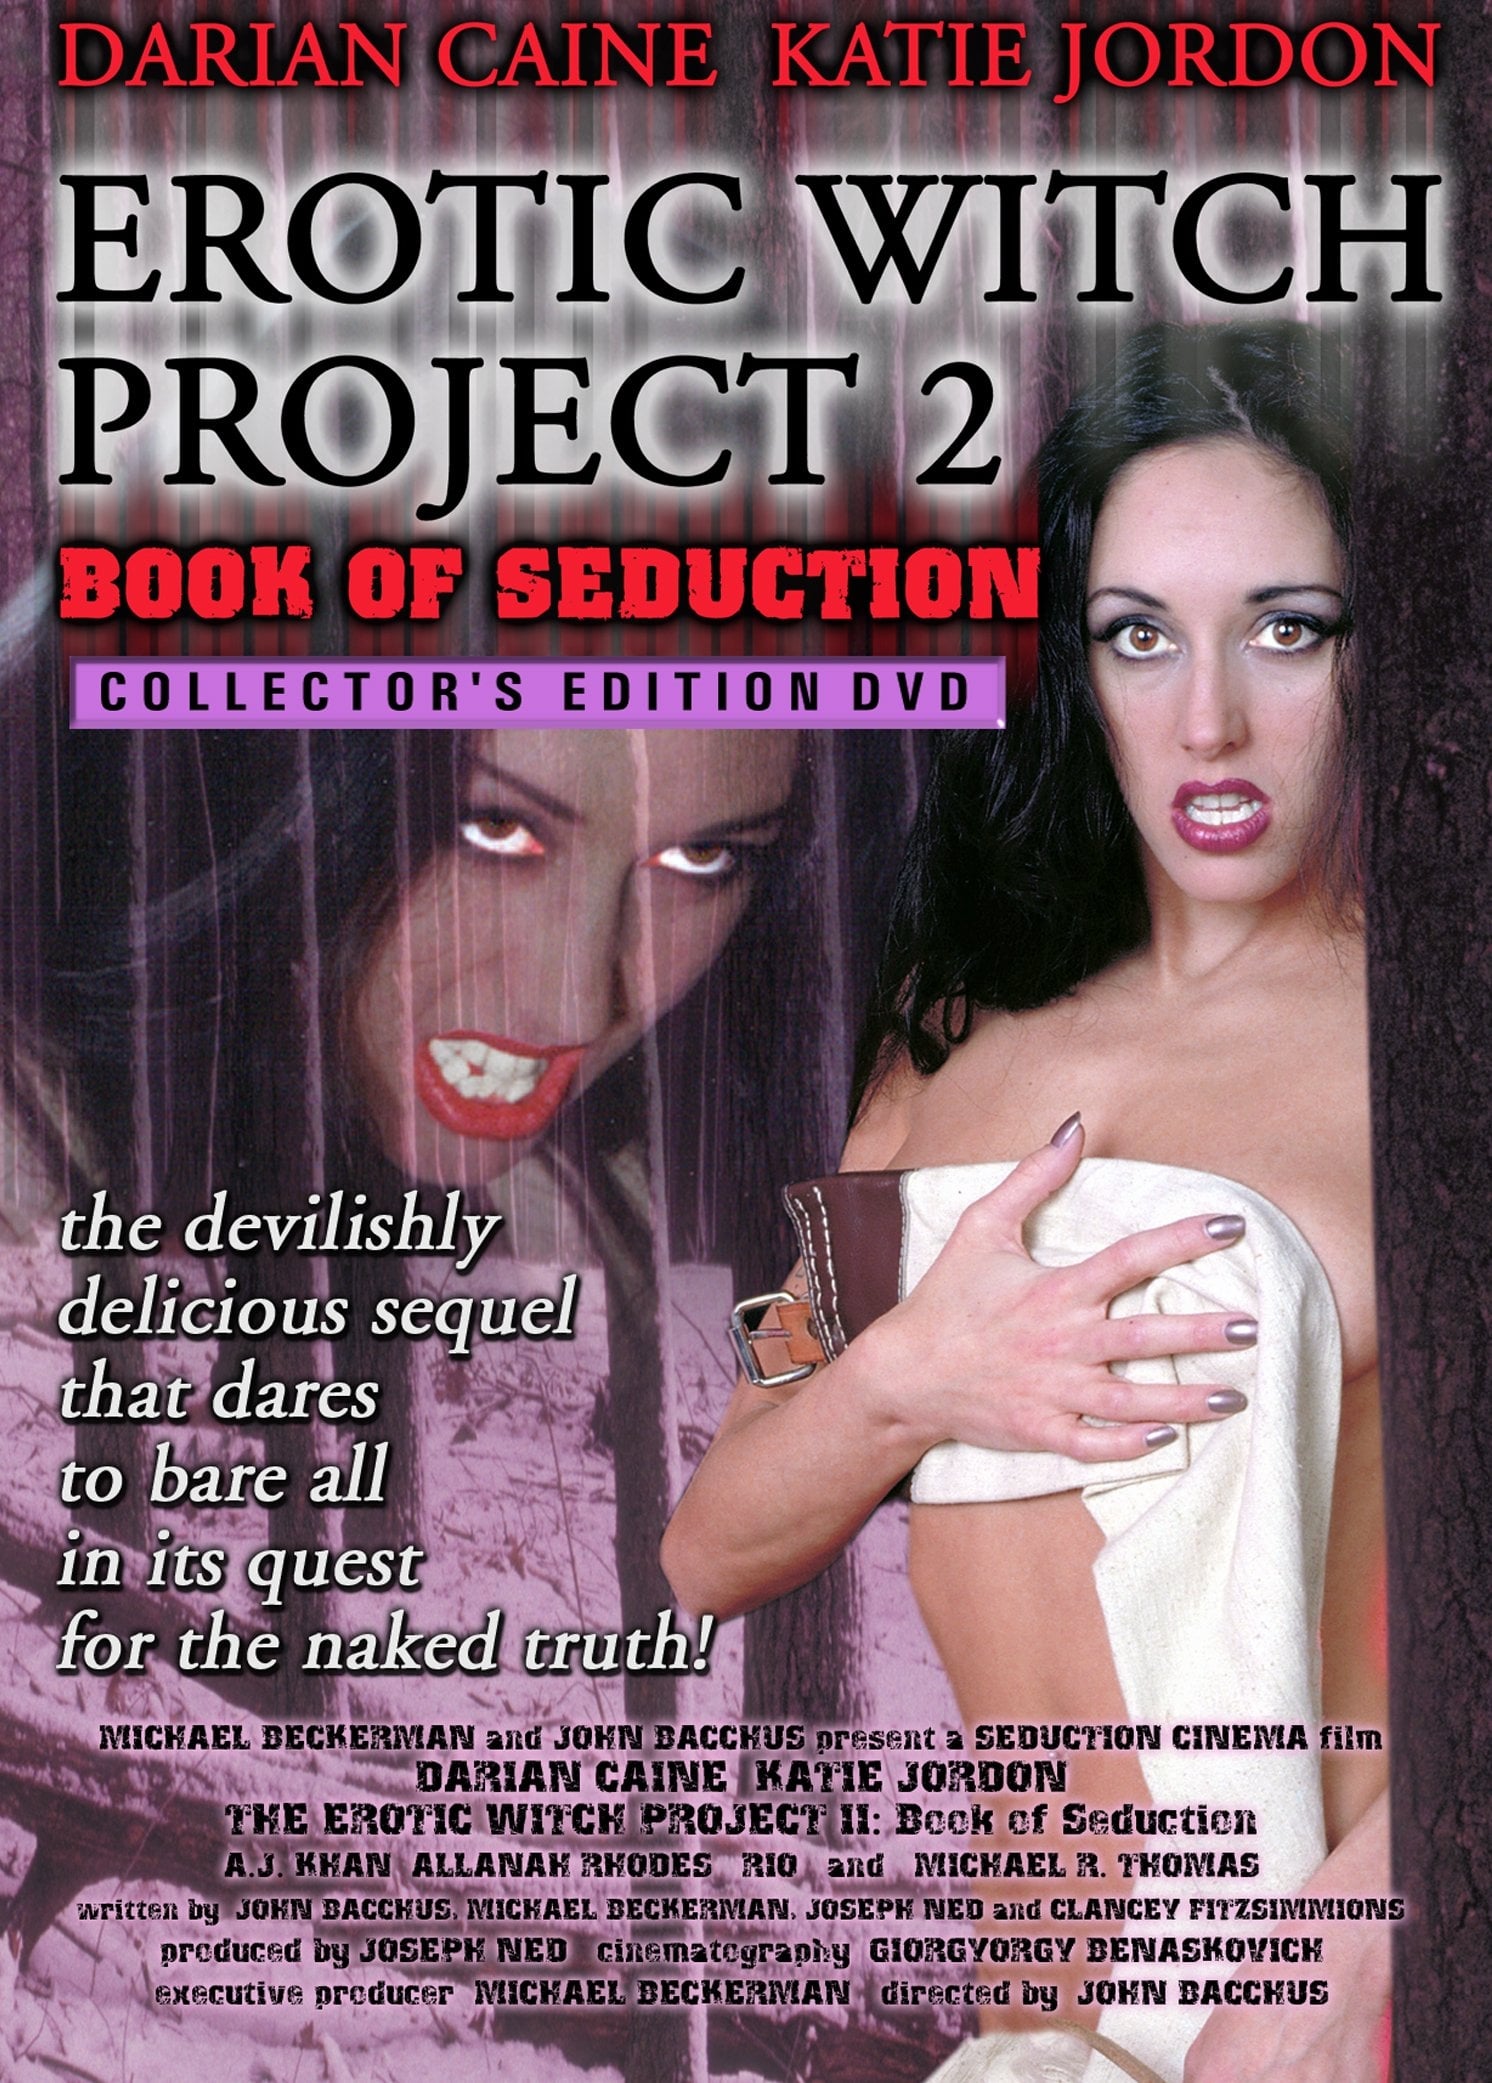 Erotic witch project